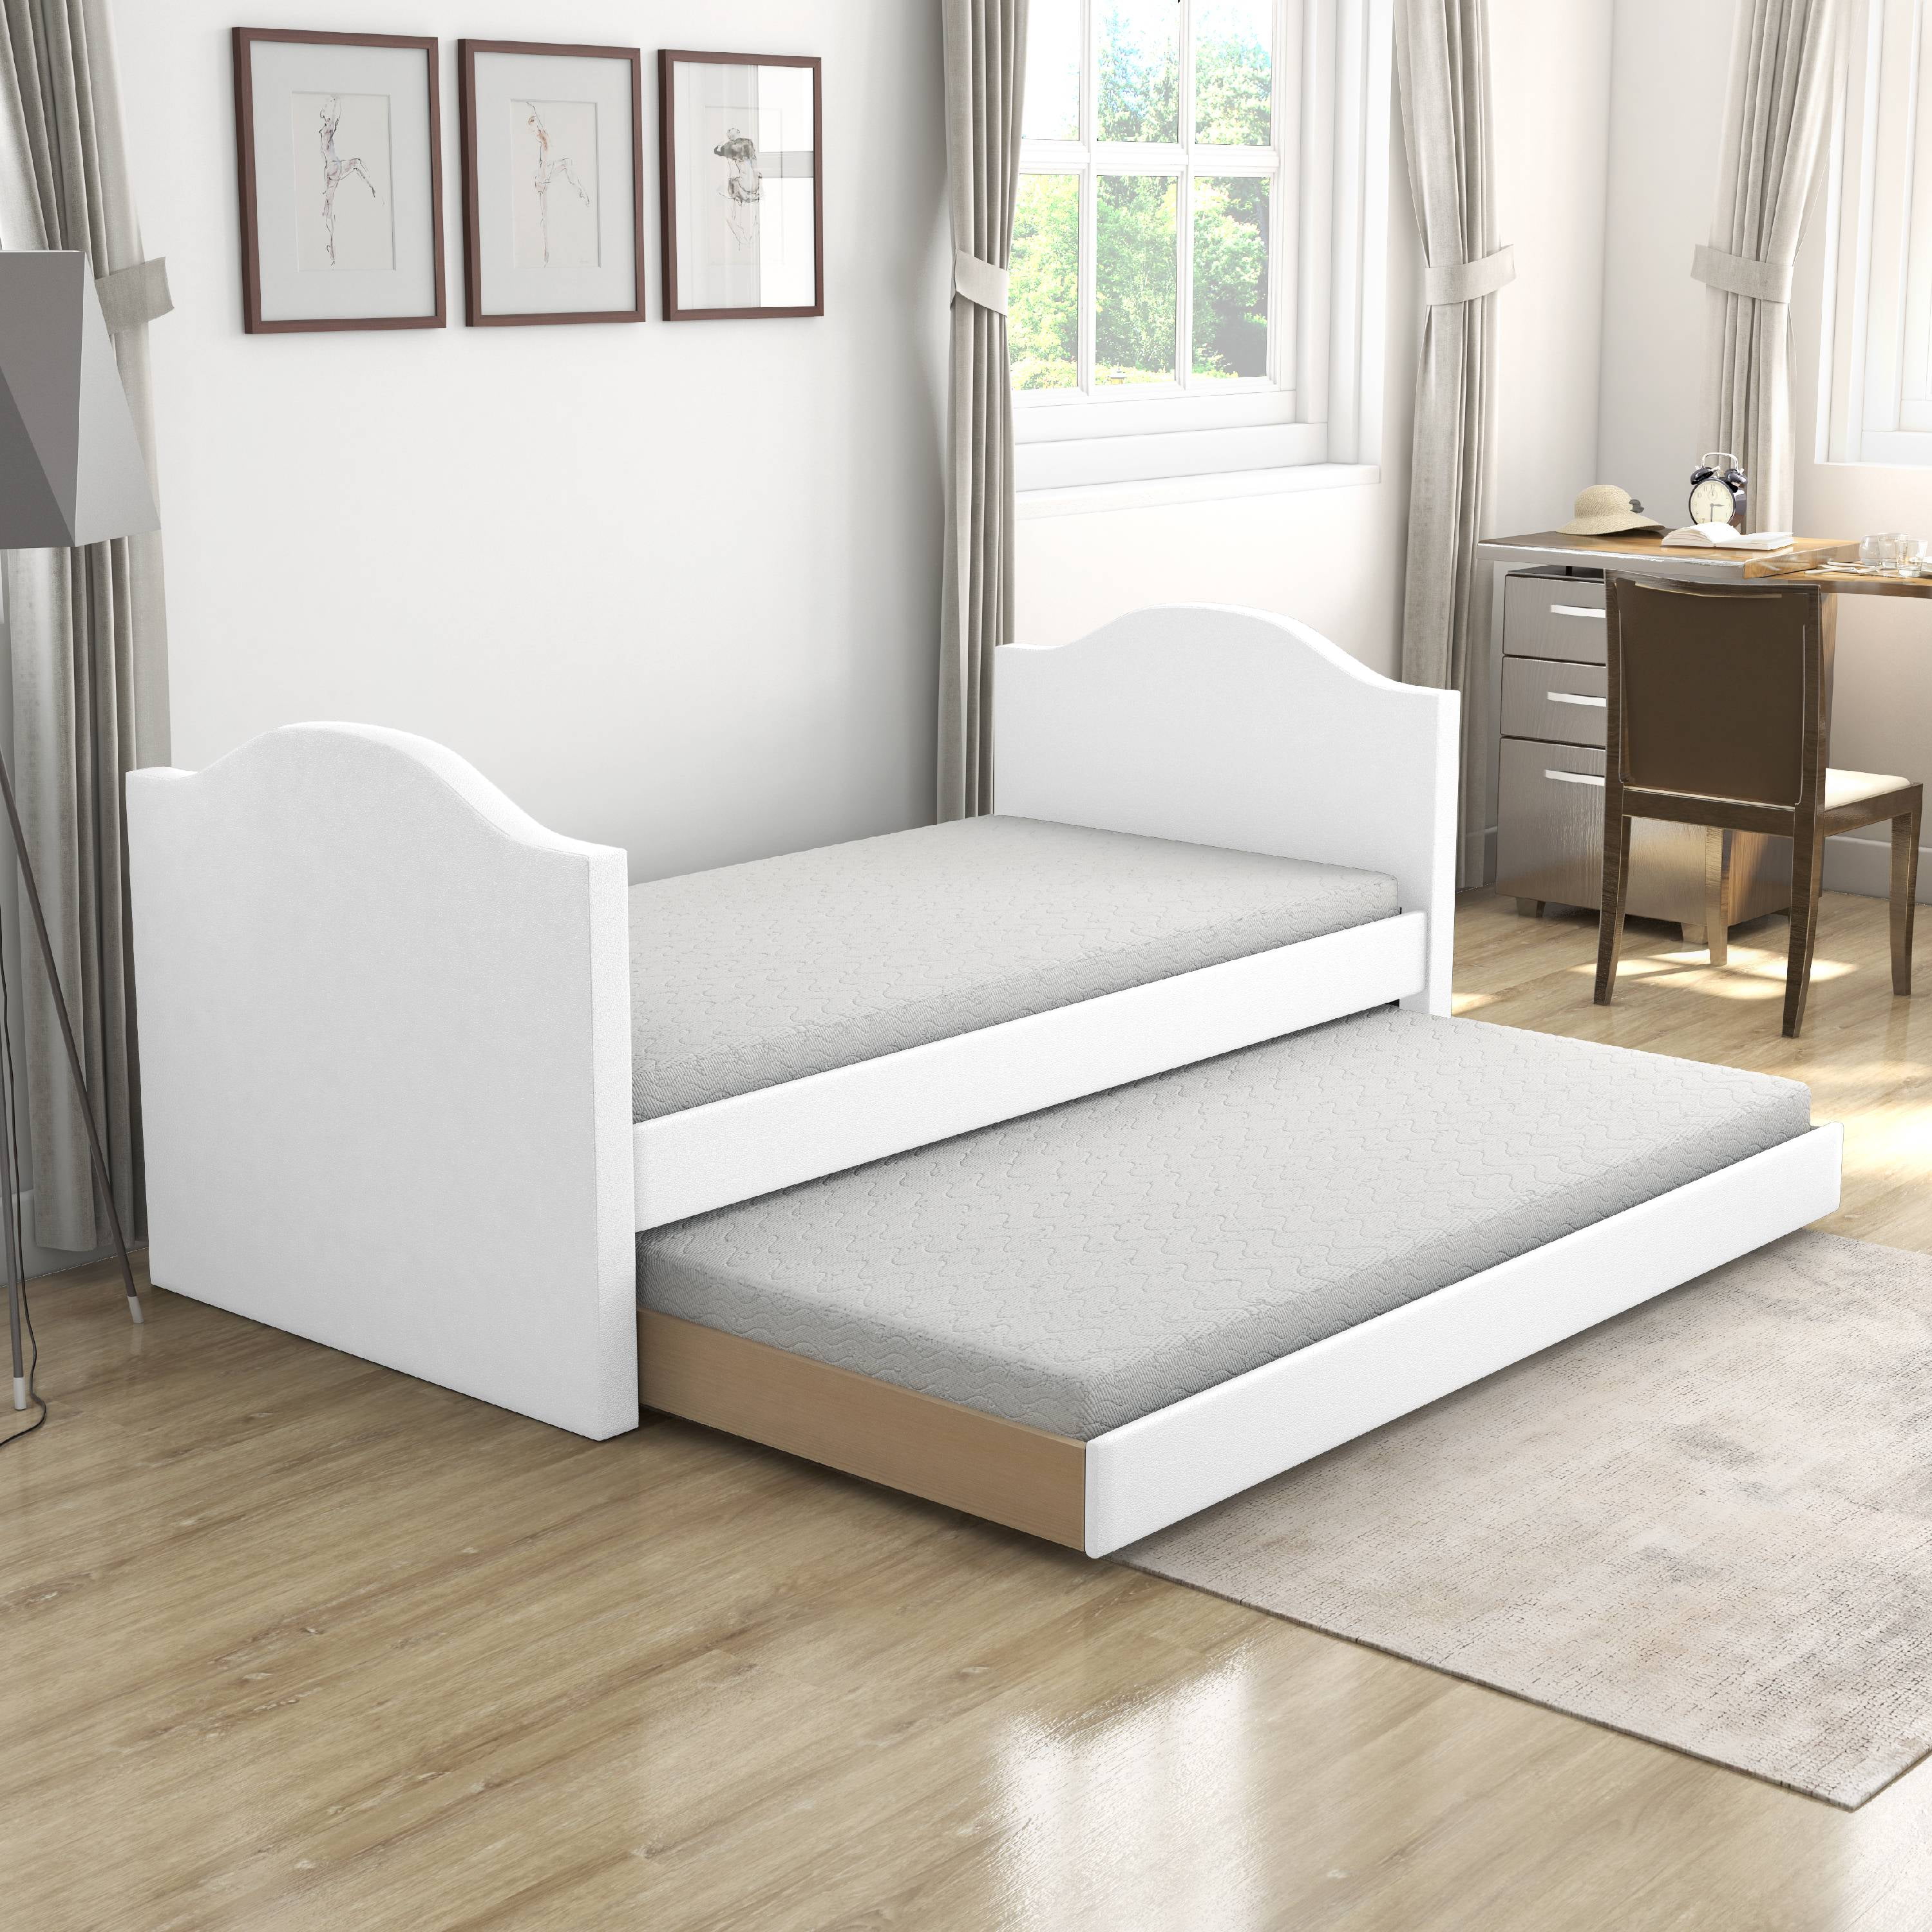 Premier Melissa White Upholstered Faux, Leather Daybed With Trundle